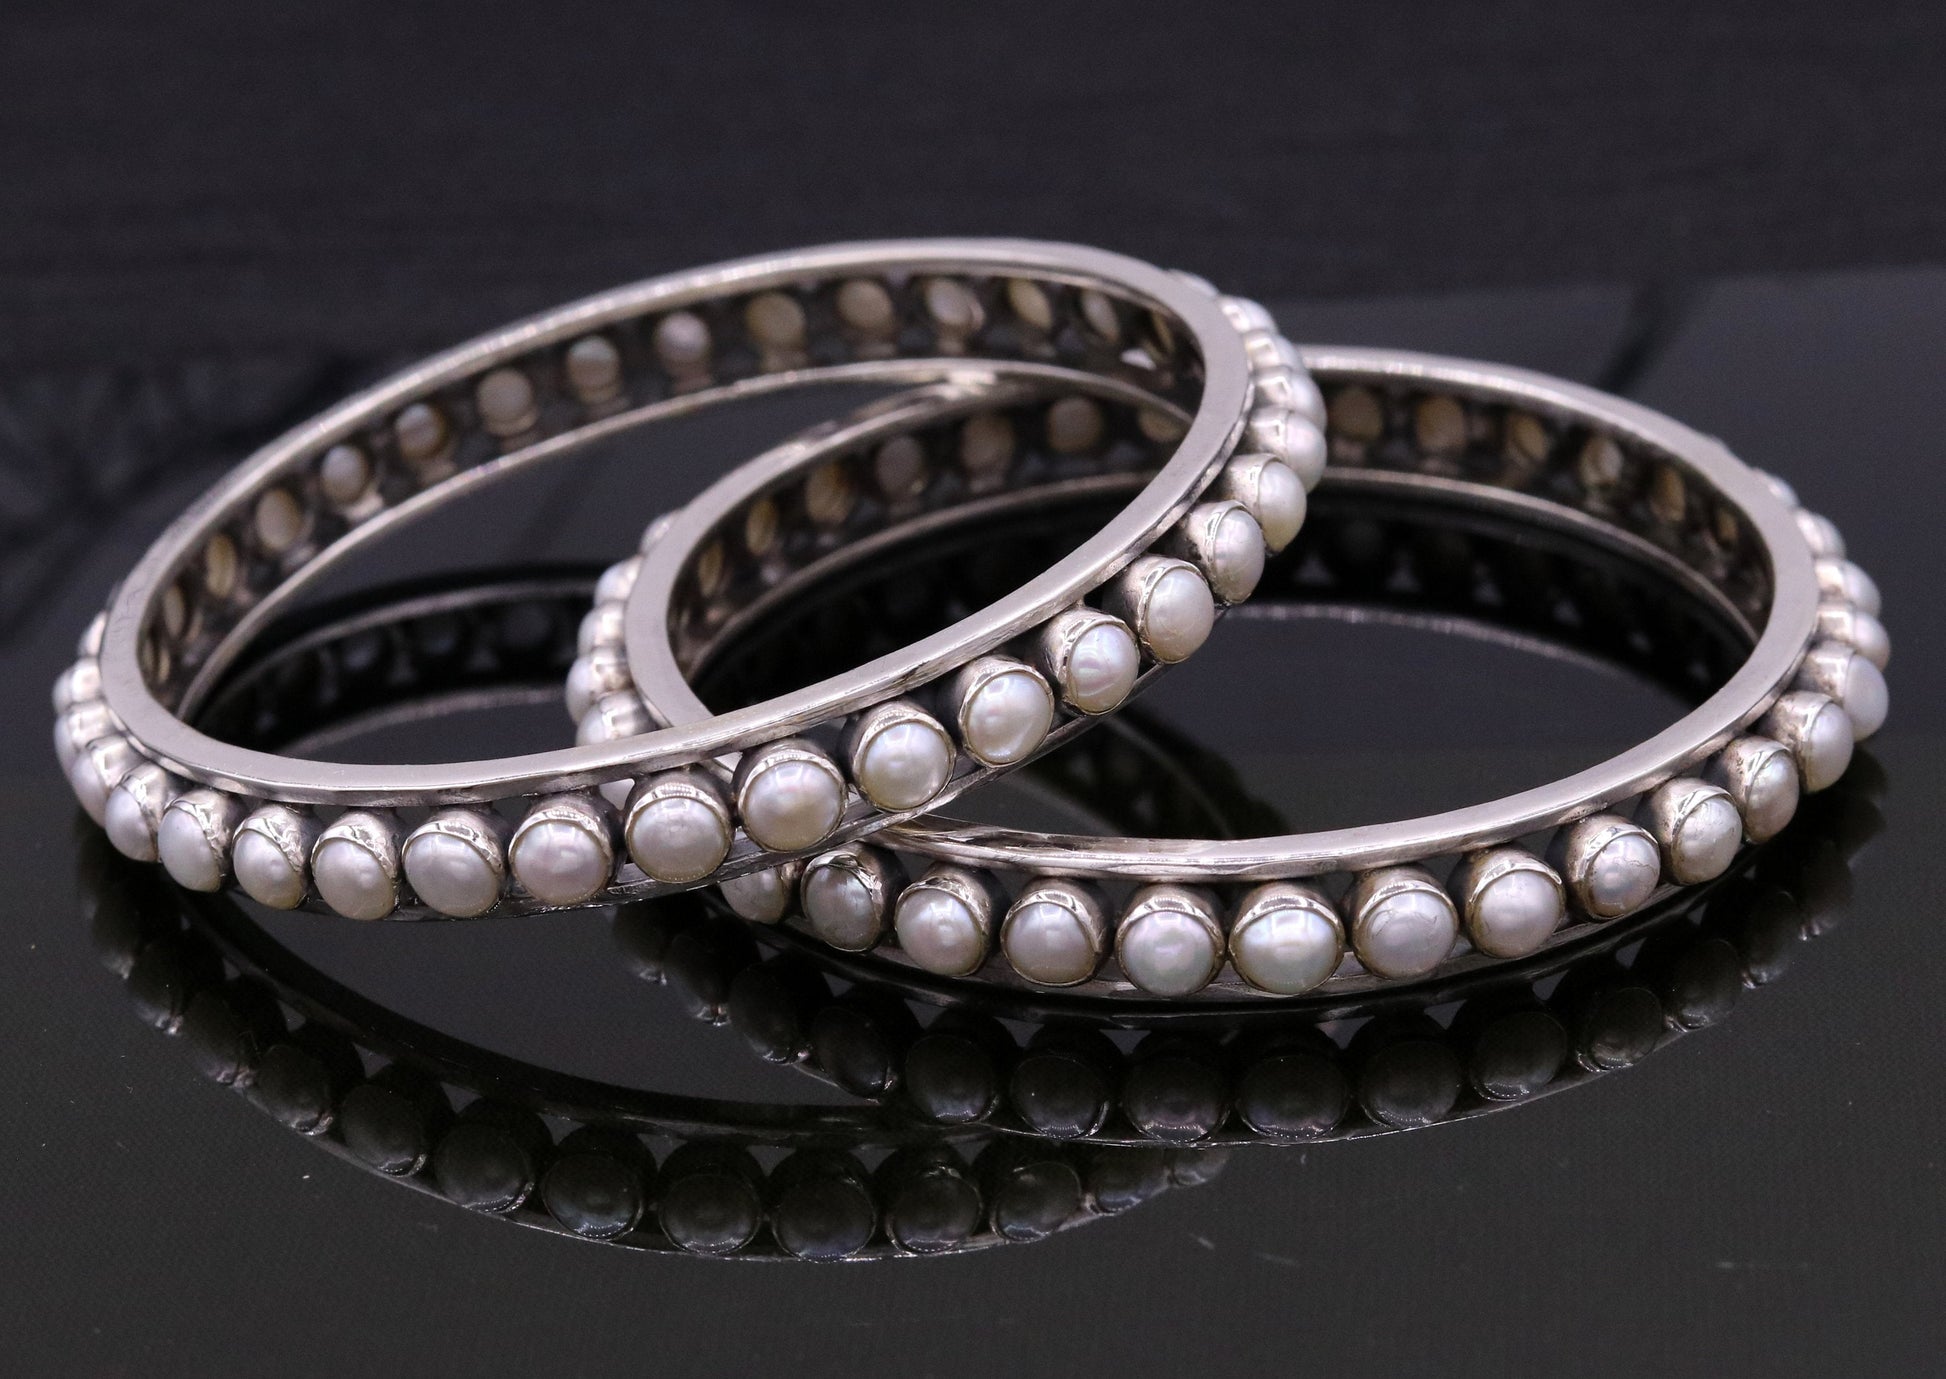 925 sterling silver handmade bangle bracelet kada, gorgeous natural pearl, amazing custom made excellent tribal bridal oxidized jewelry ba45 - TRIBAL ORNAMENTS